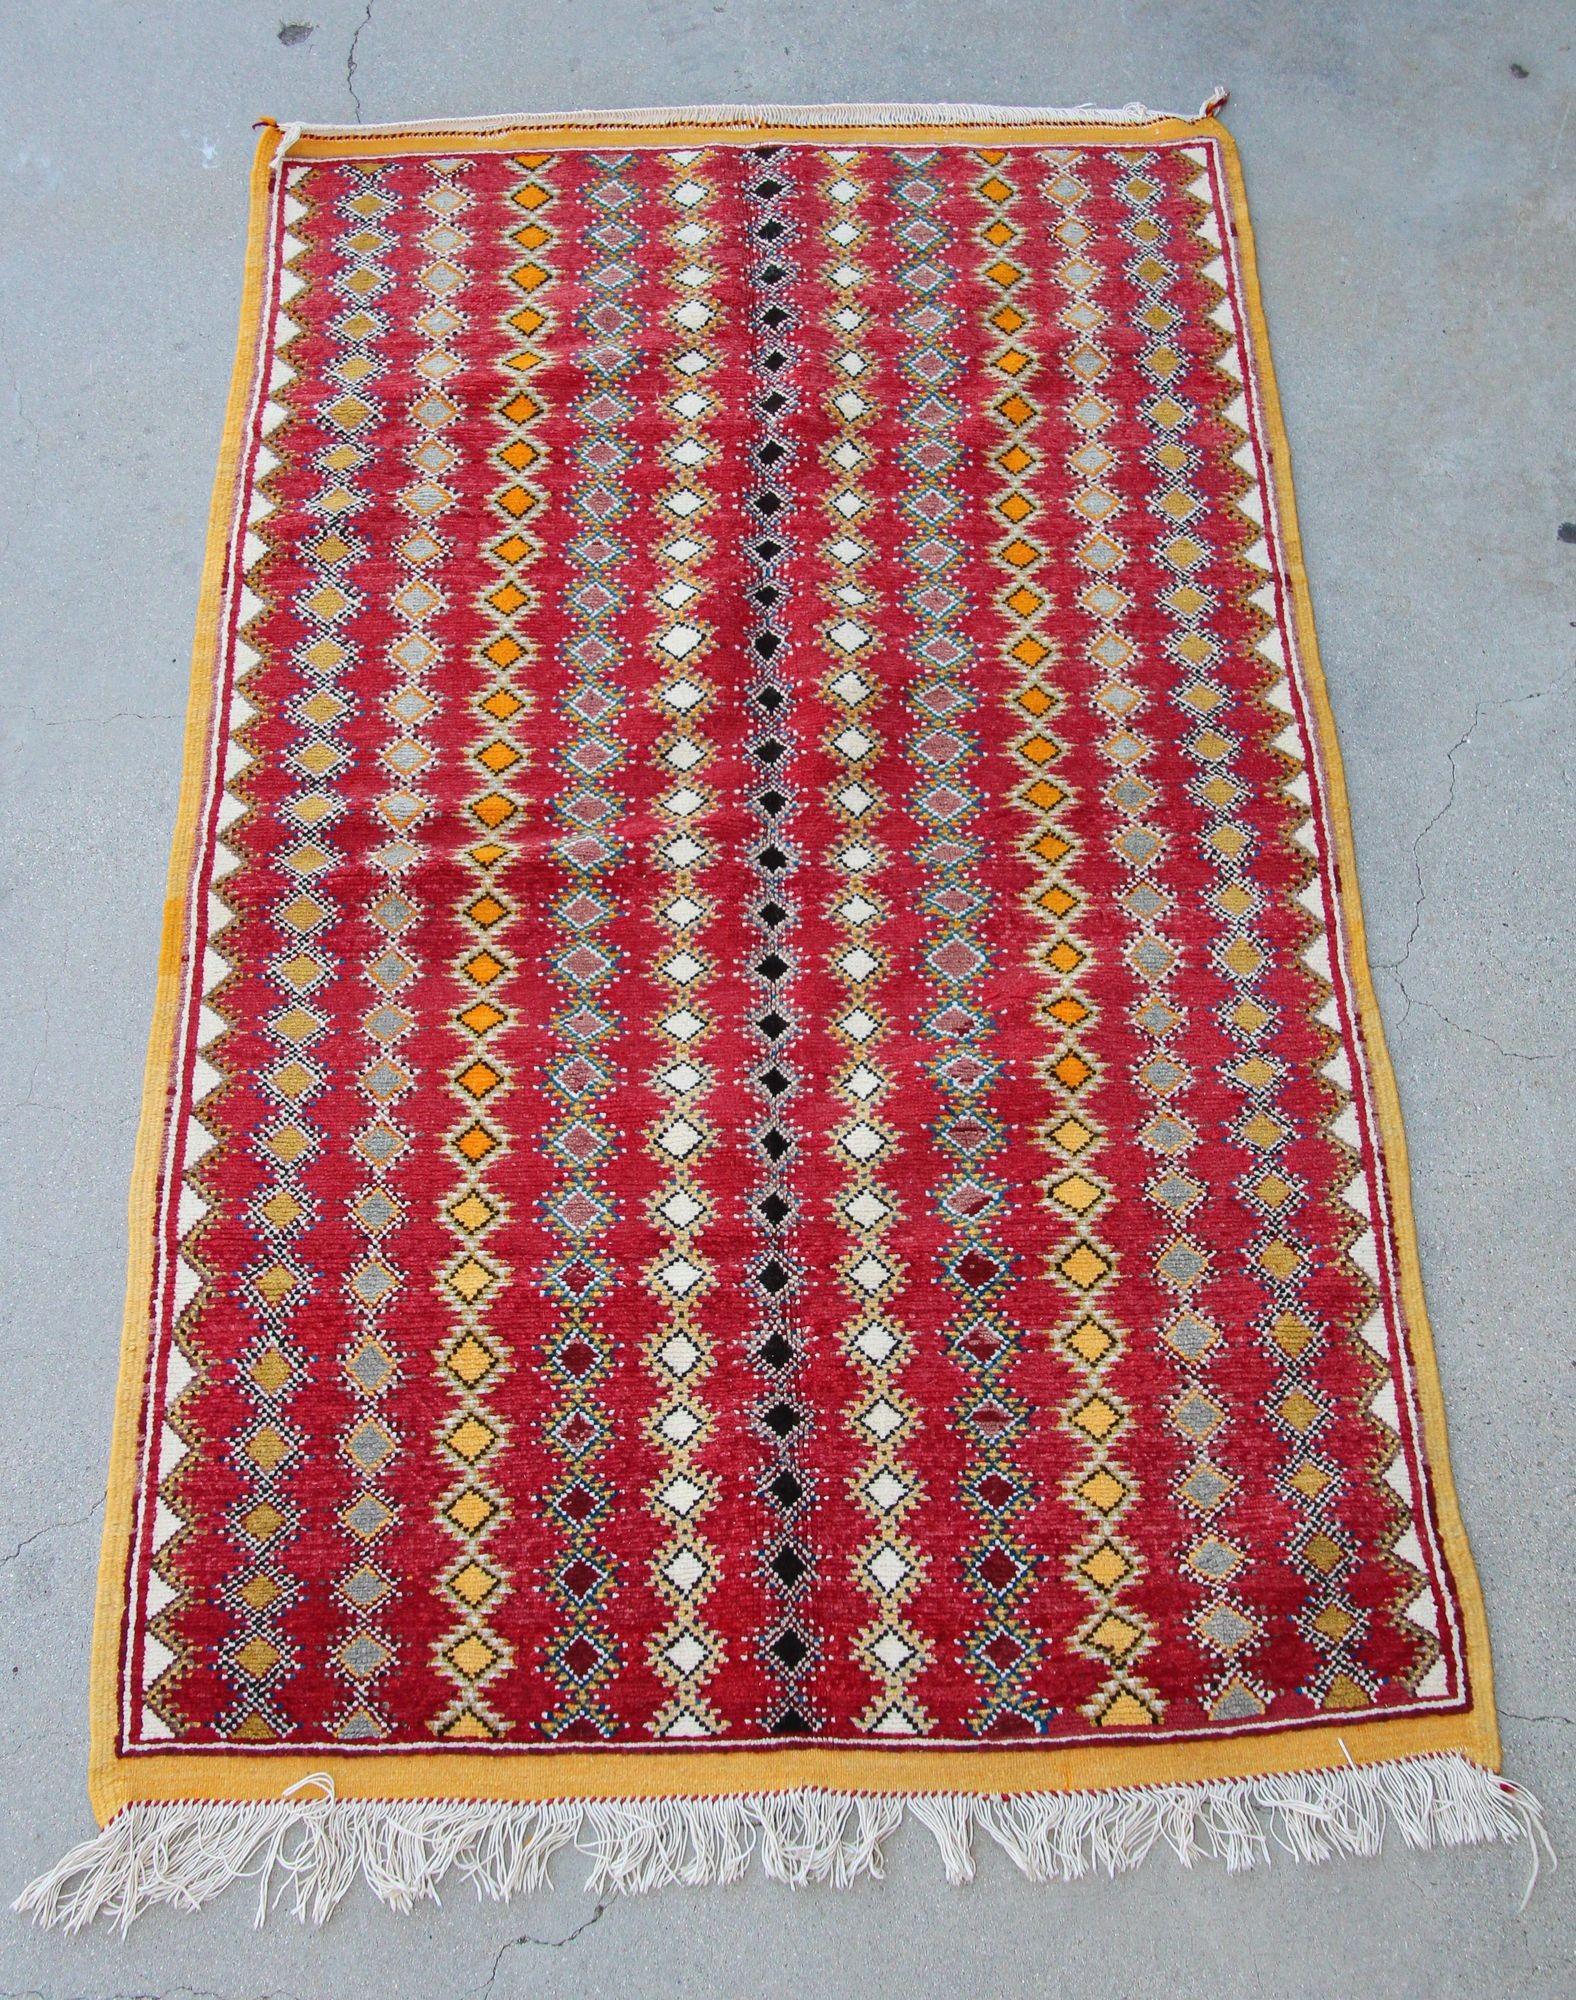 Moroccan authentic vintage tribal rug handwoven by Berber Moroccan women using organic lamb wo and organic dye. North African Moroccan tribal runner with low pile handwoven wo, hand-knotted by the Berber tribes of Morocco with traditional geometric